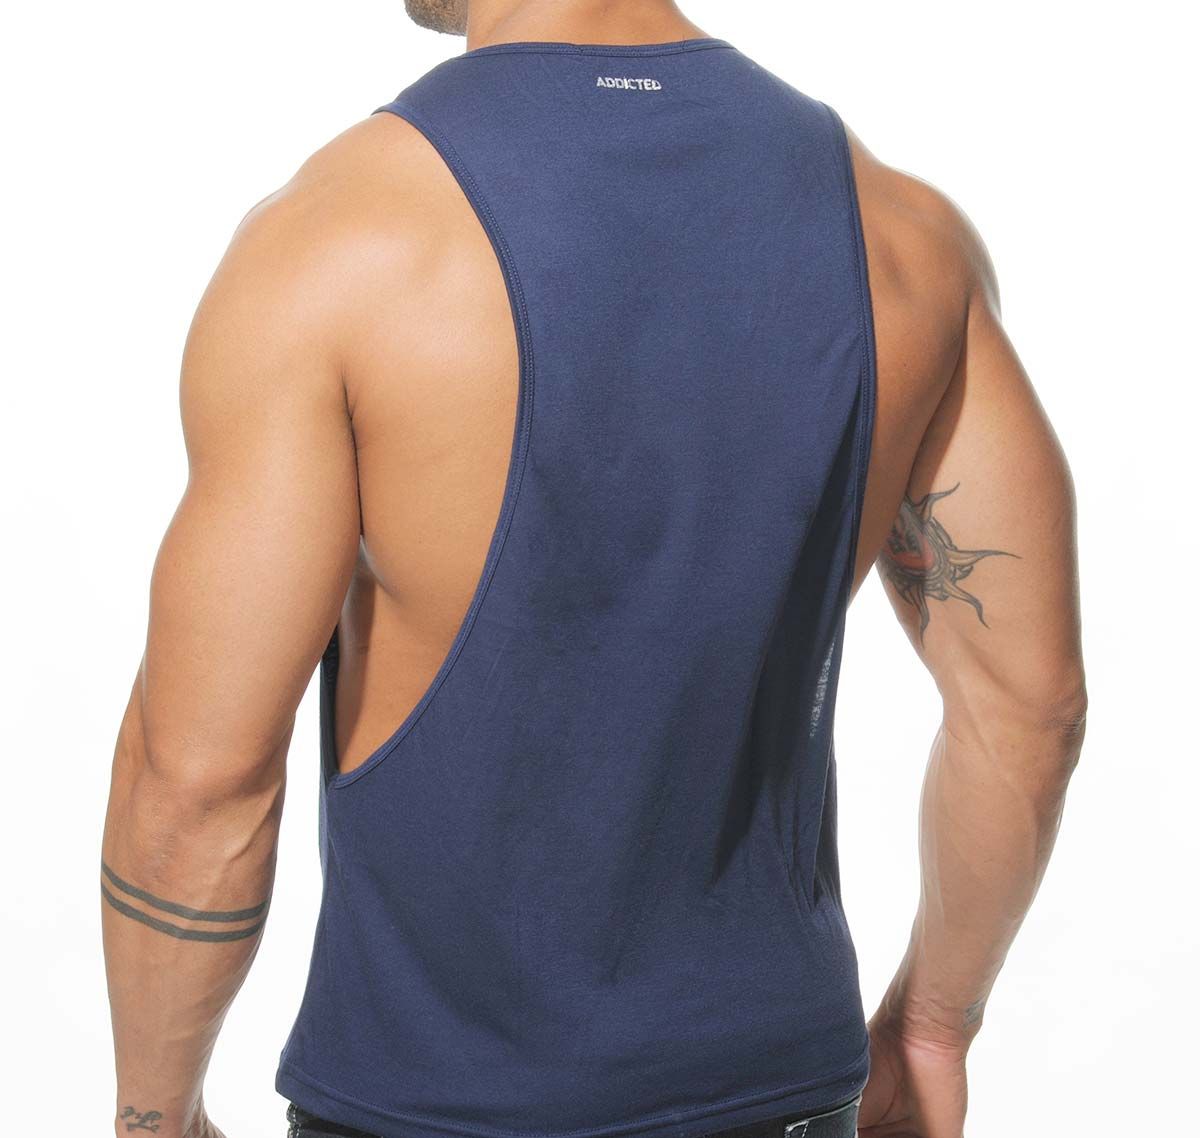 Addicted Tank Top AD LOW RIDER AD043, navy